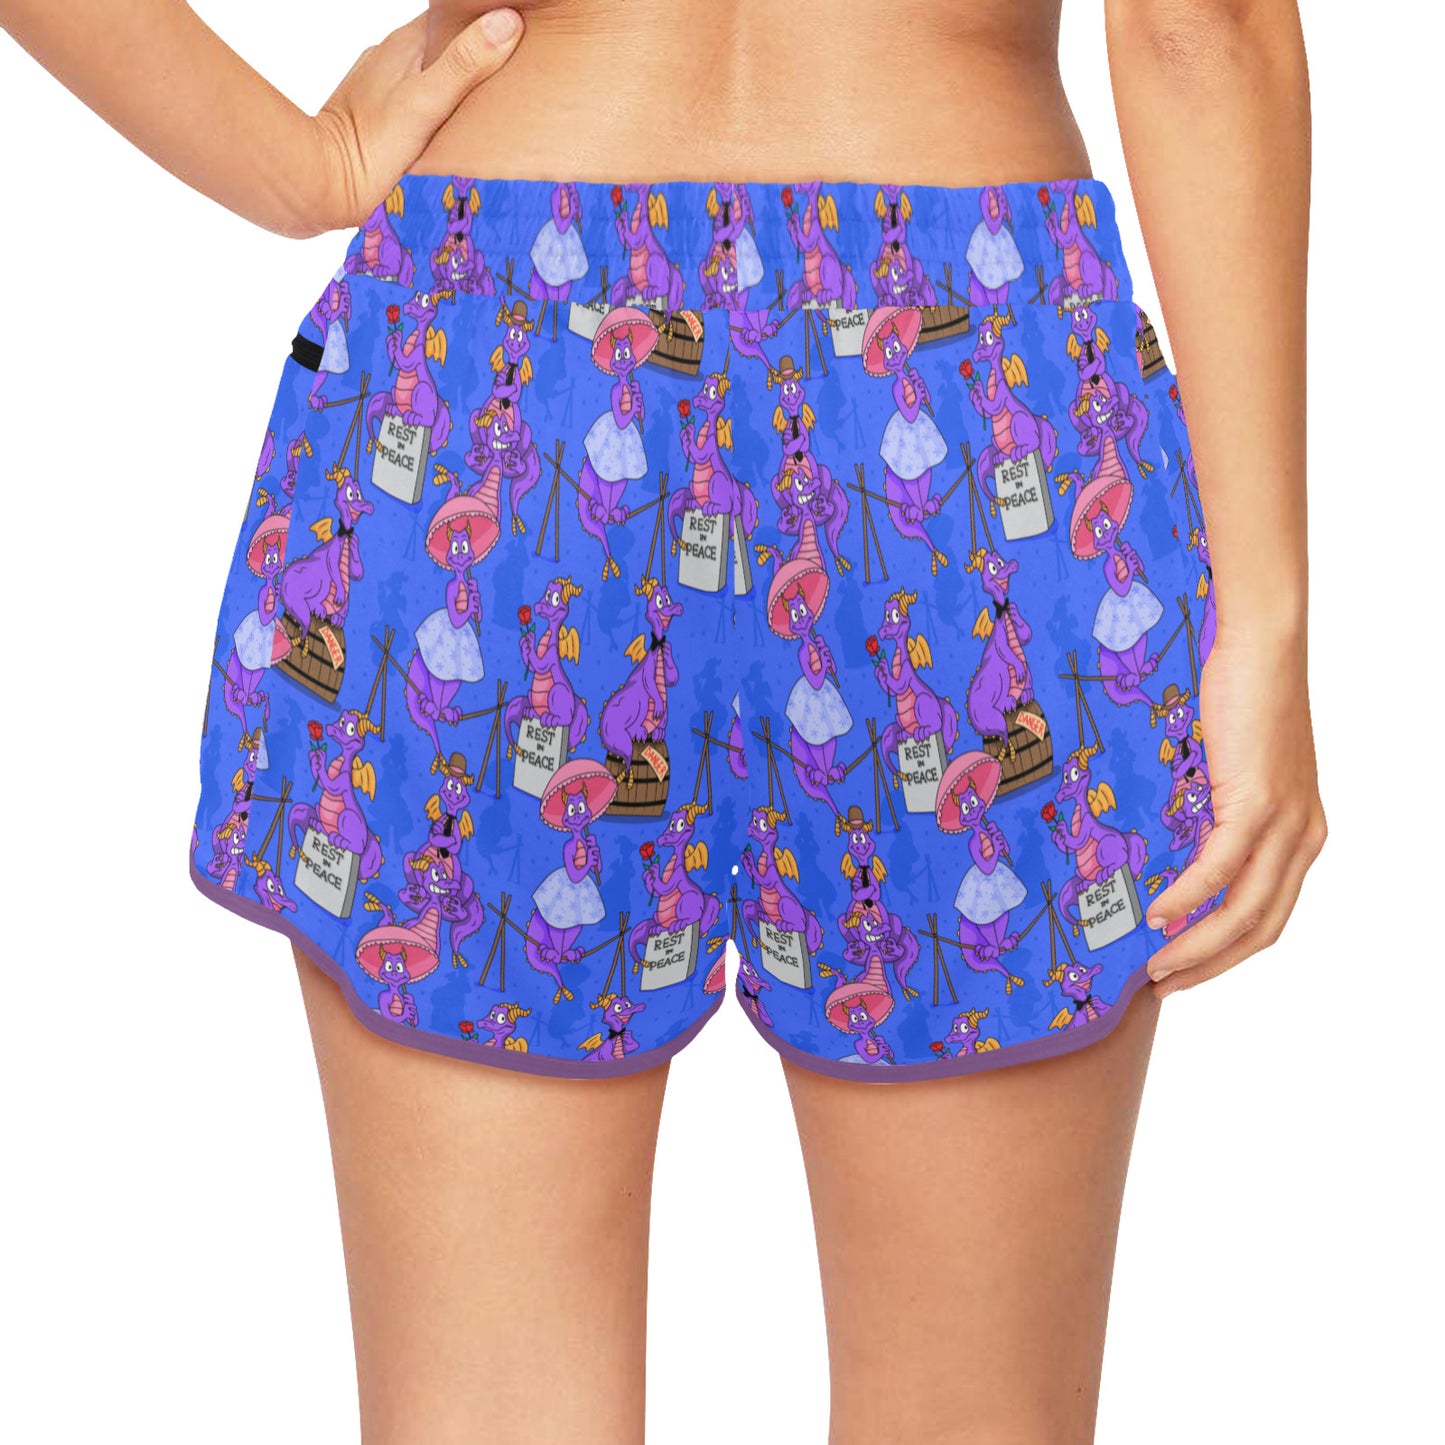 Haunted Mansion Figment Women's Athletic Sports Shorts